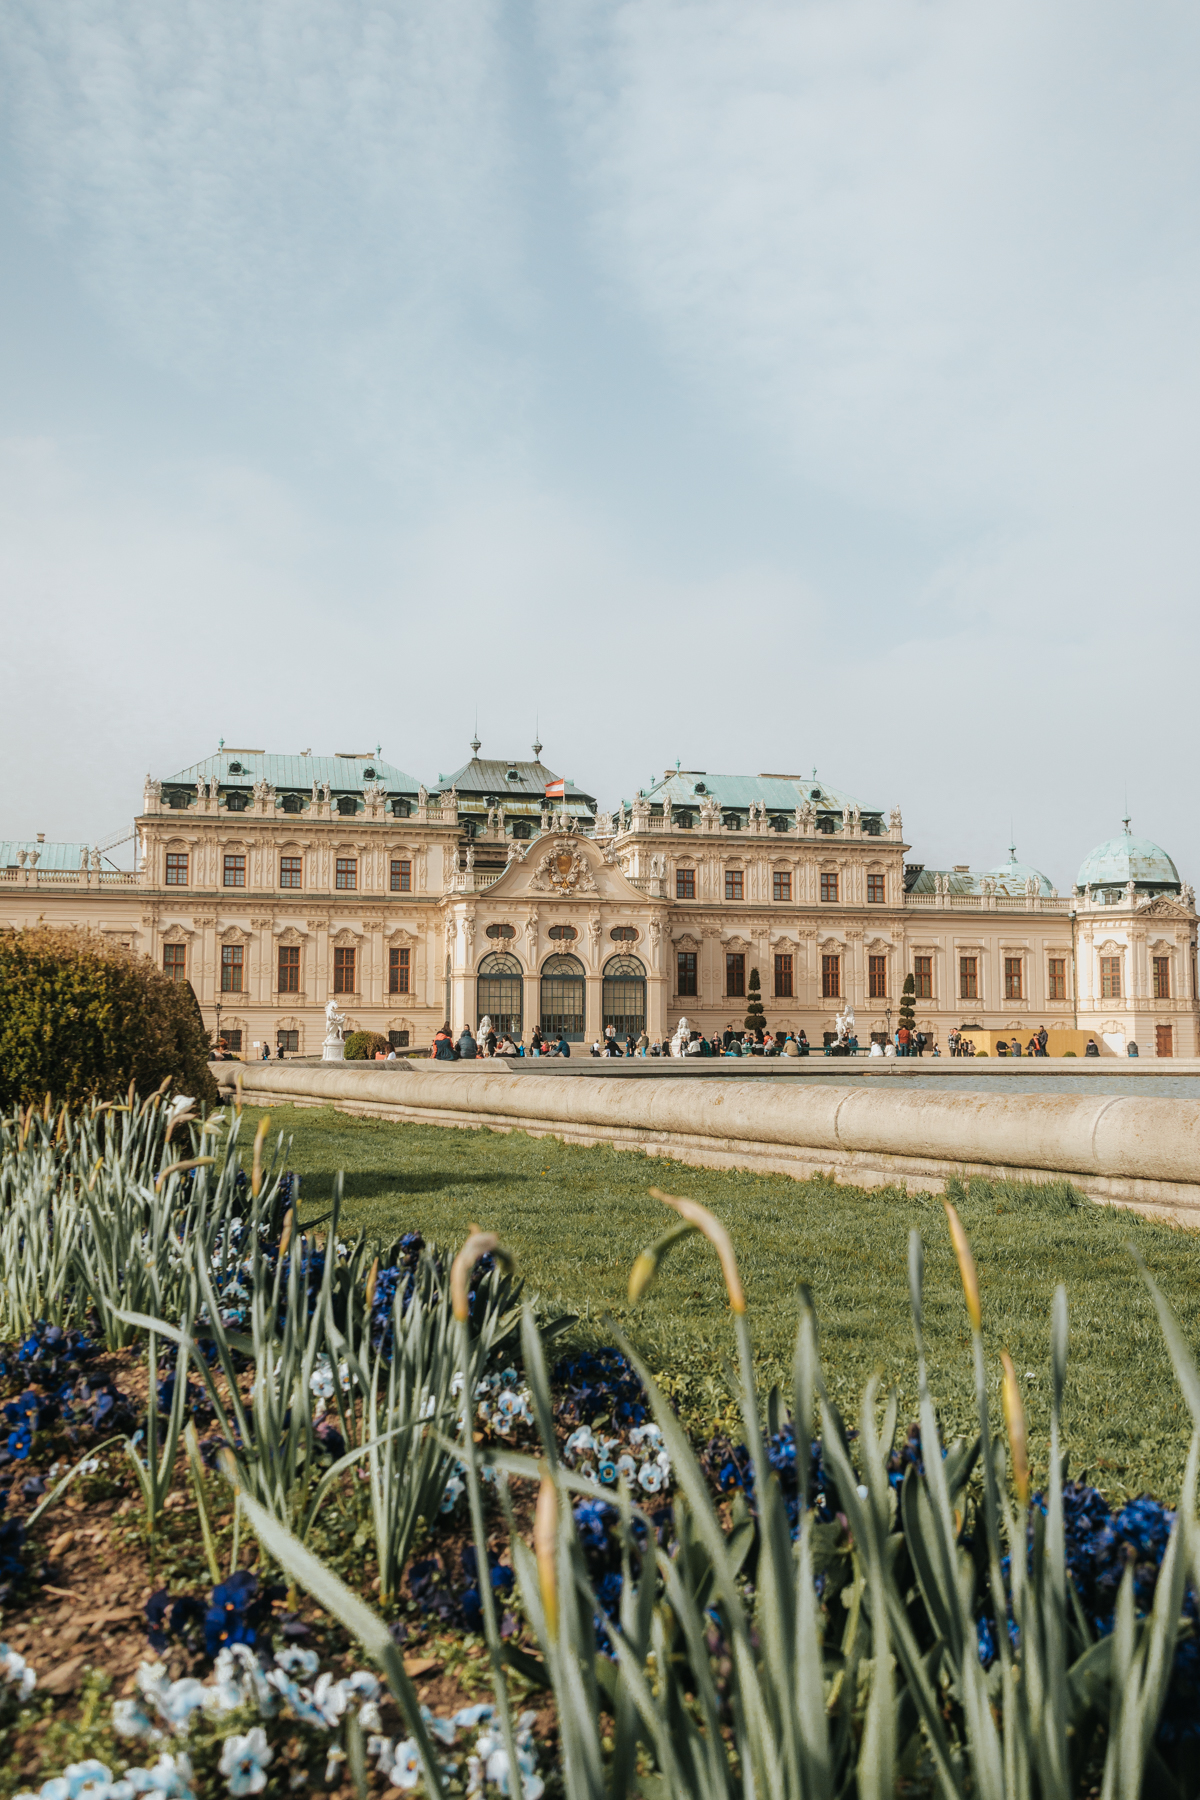 Only Have 3 Days In Vienna? Here Are 22 Unmissable Things To Do